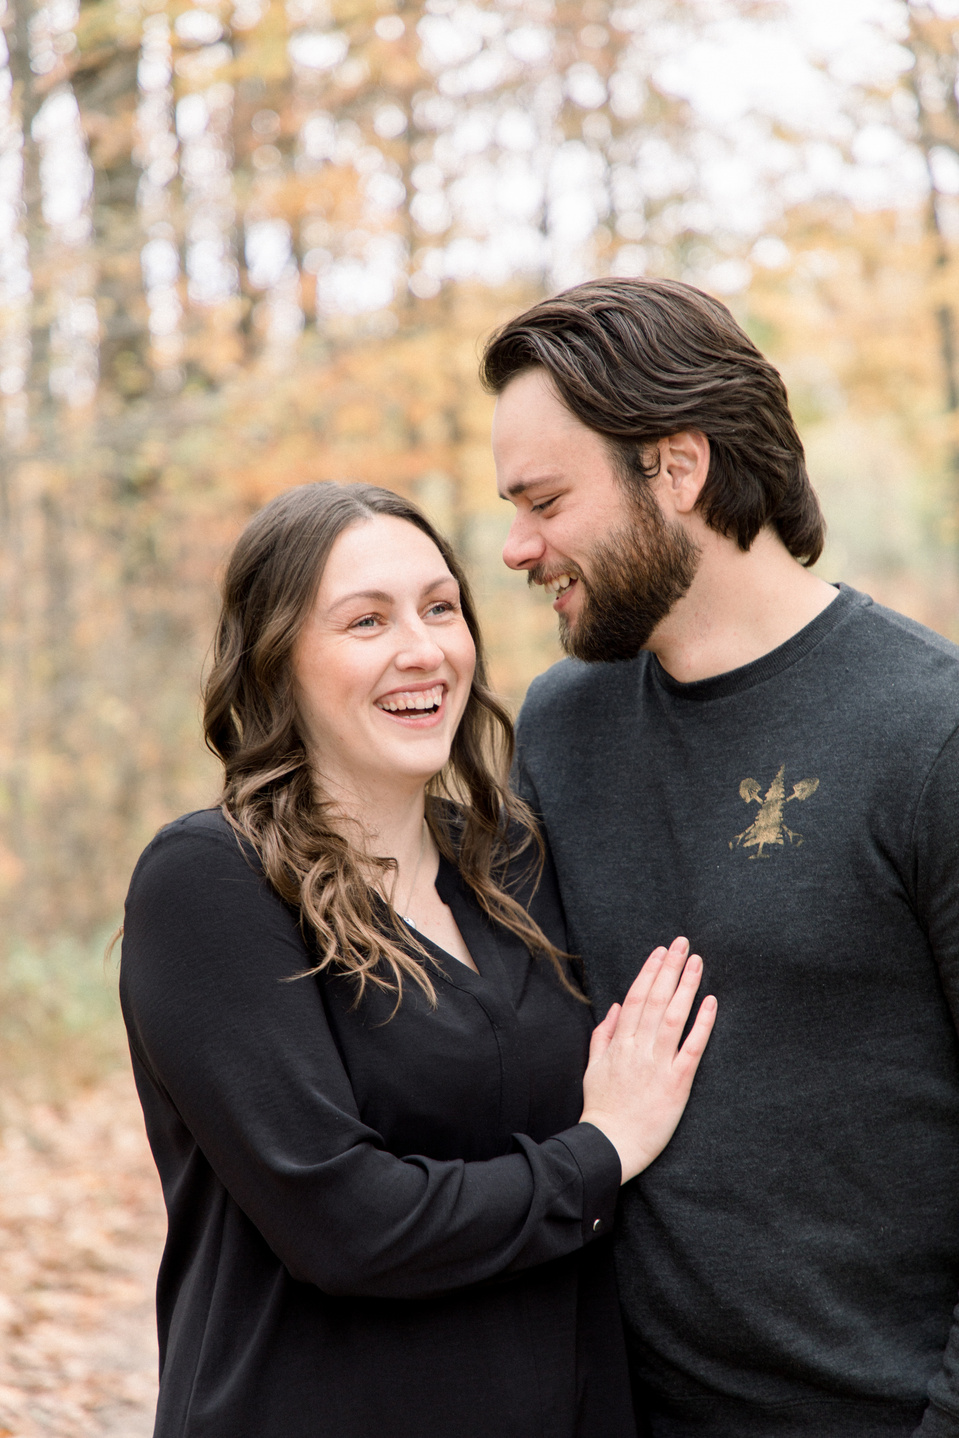 Portrait of couple, man whispering secret to woman, woman laughing. Niagara portrait photography, Niagara portrait photographer, Niagara family photography, Niagara family photographer.